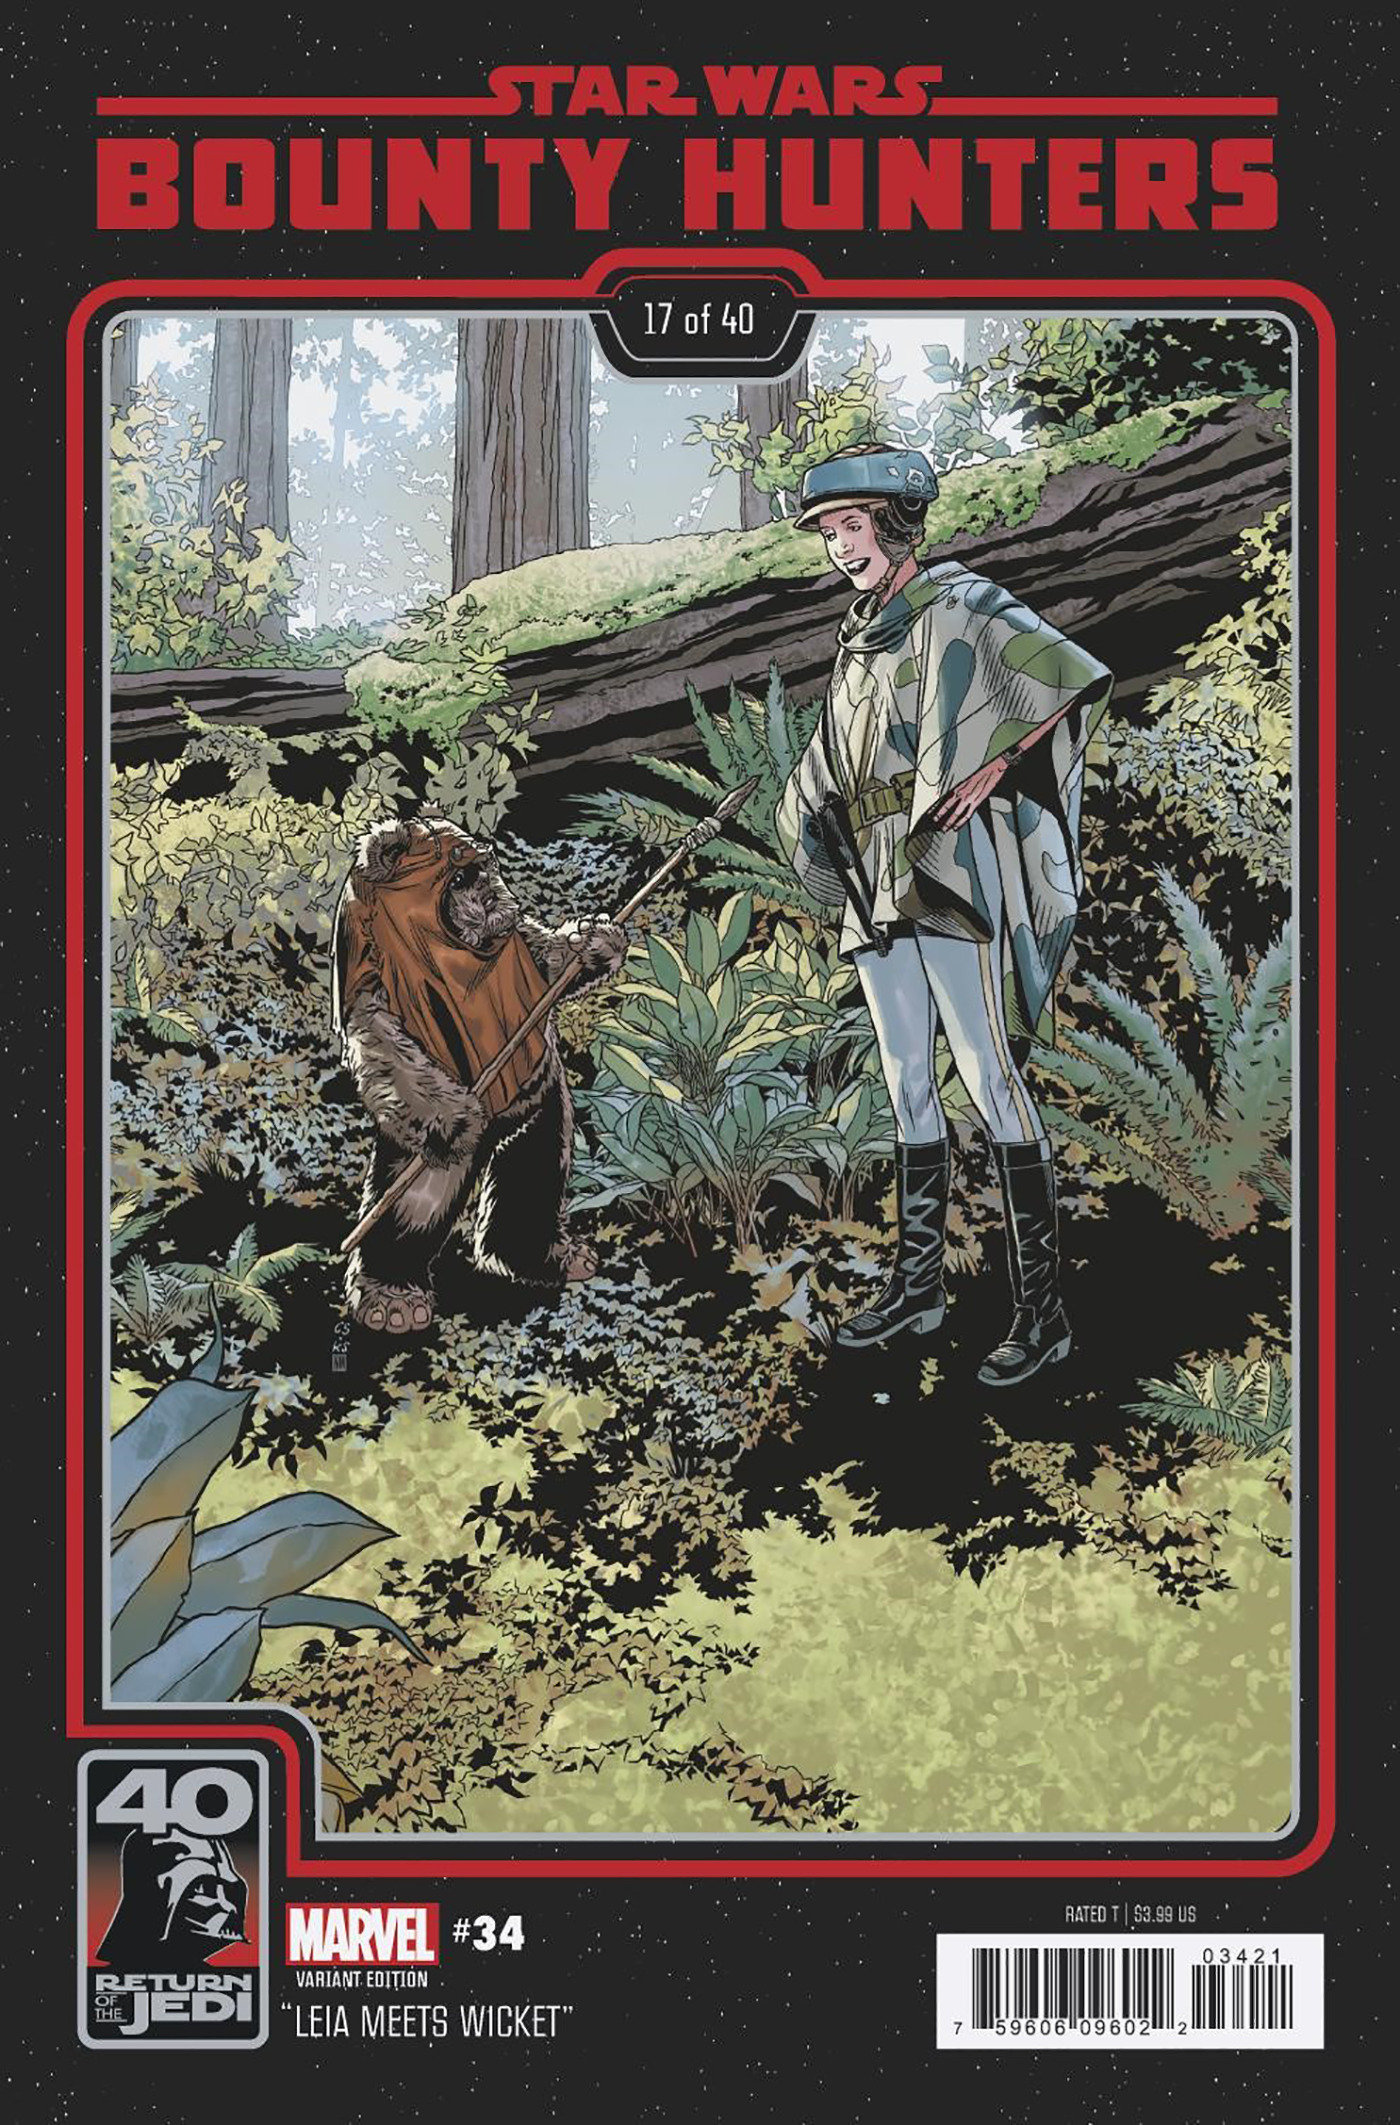 Star Wars: Bounty Hunters #34 Chris Sprouse Return of the Jedi 40th Anniversary Variant